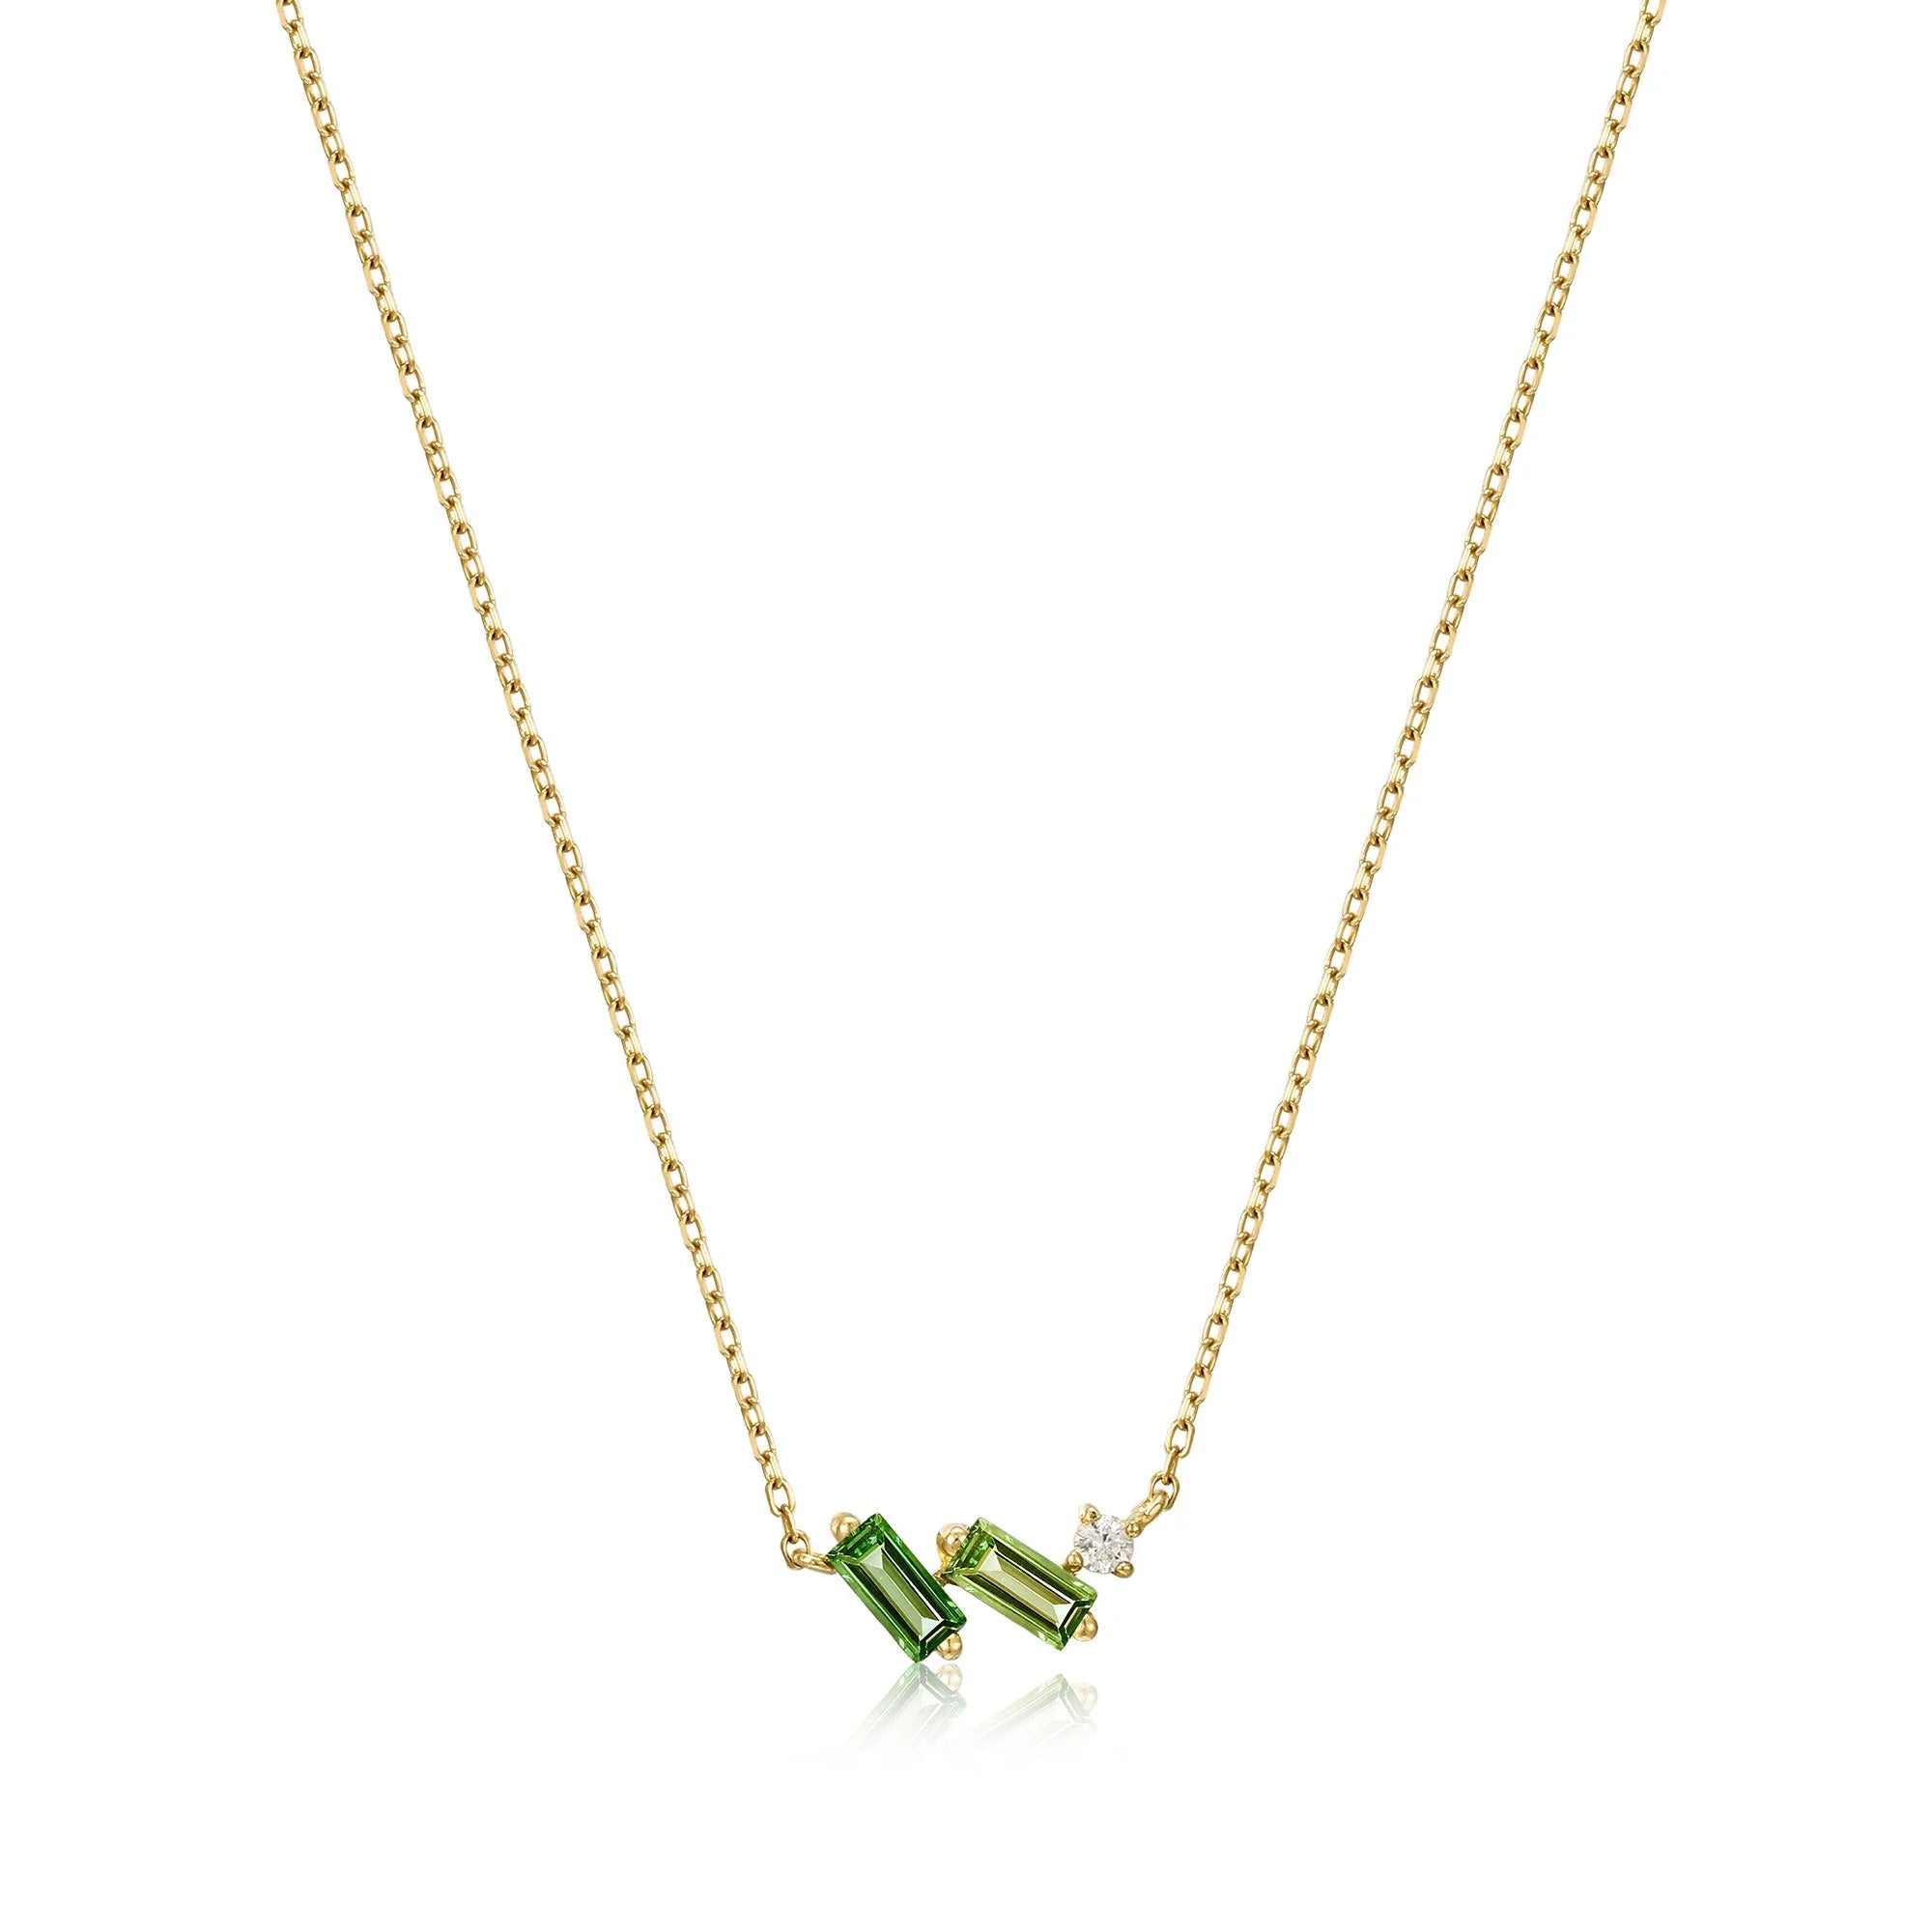 Ania Haie 14kt Gold Tourmaline and White Sapphire Necklace